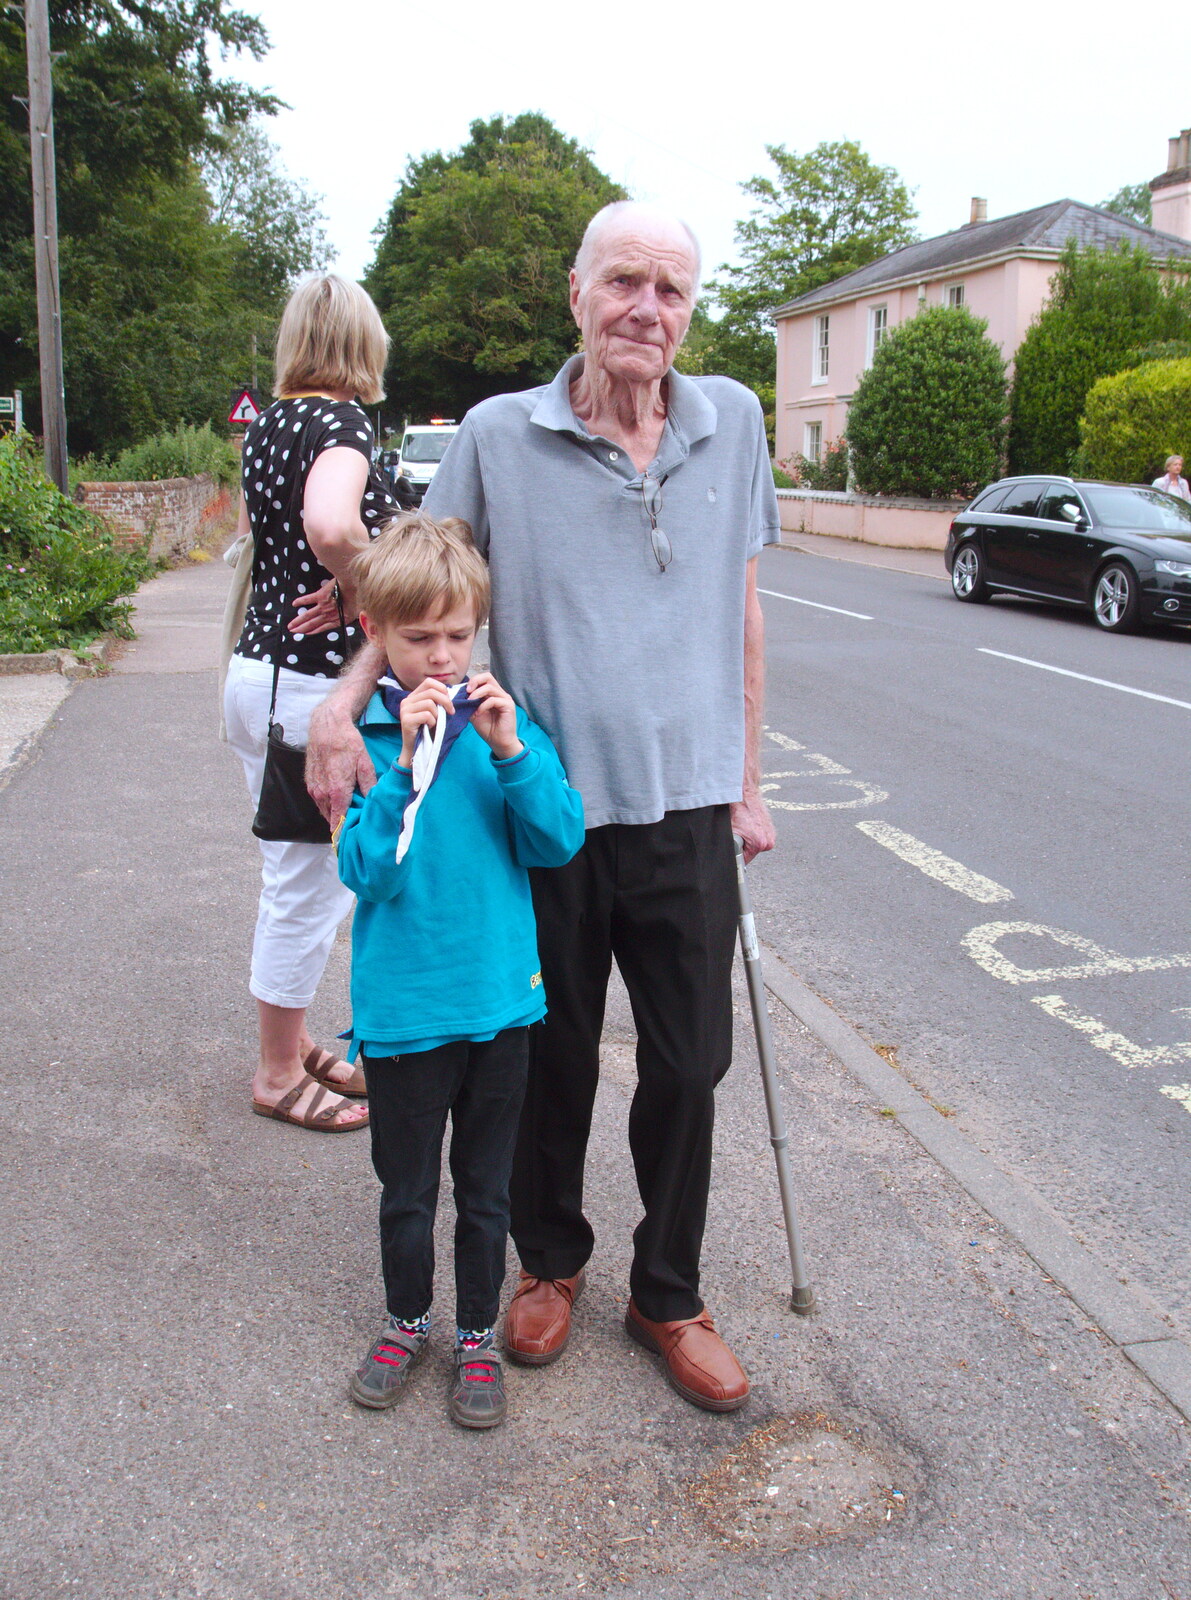 Harry and the G-Unit on Lambseth Street in Eye from The BSCC at North Lopham, and the GSB Mayor's Parade, Eye, Suffolk - 23rd June 2019